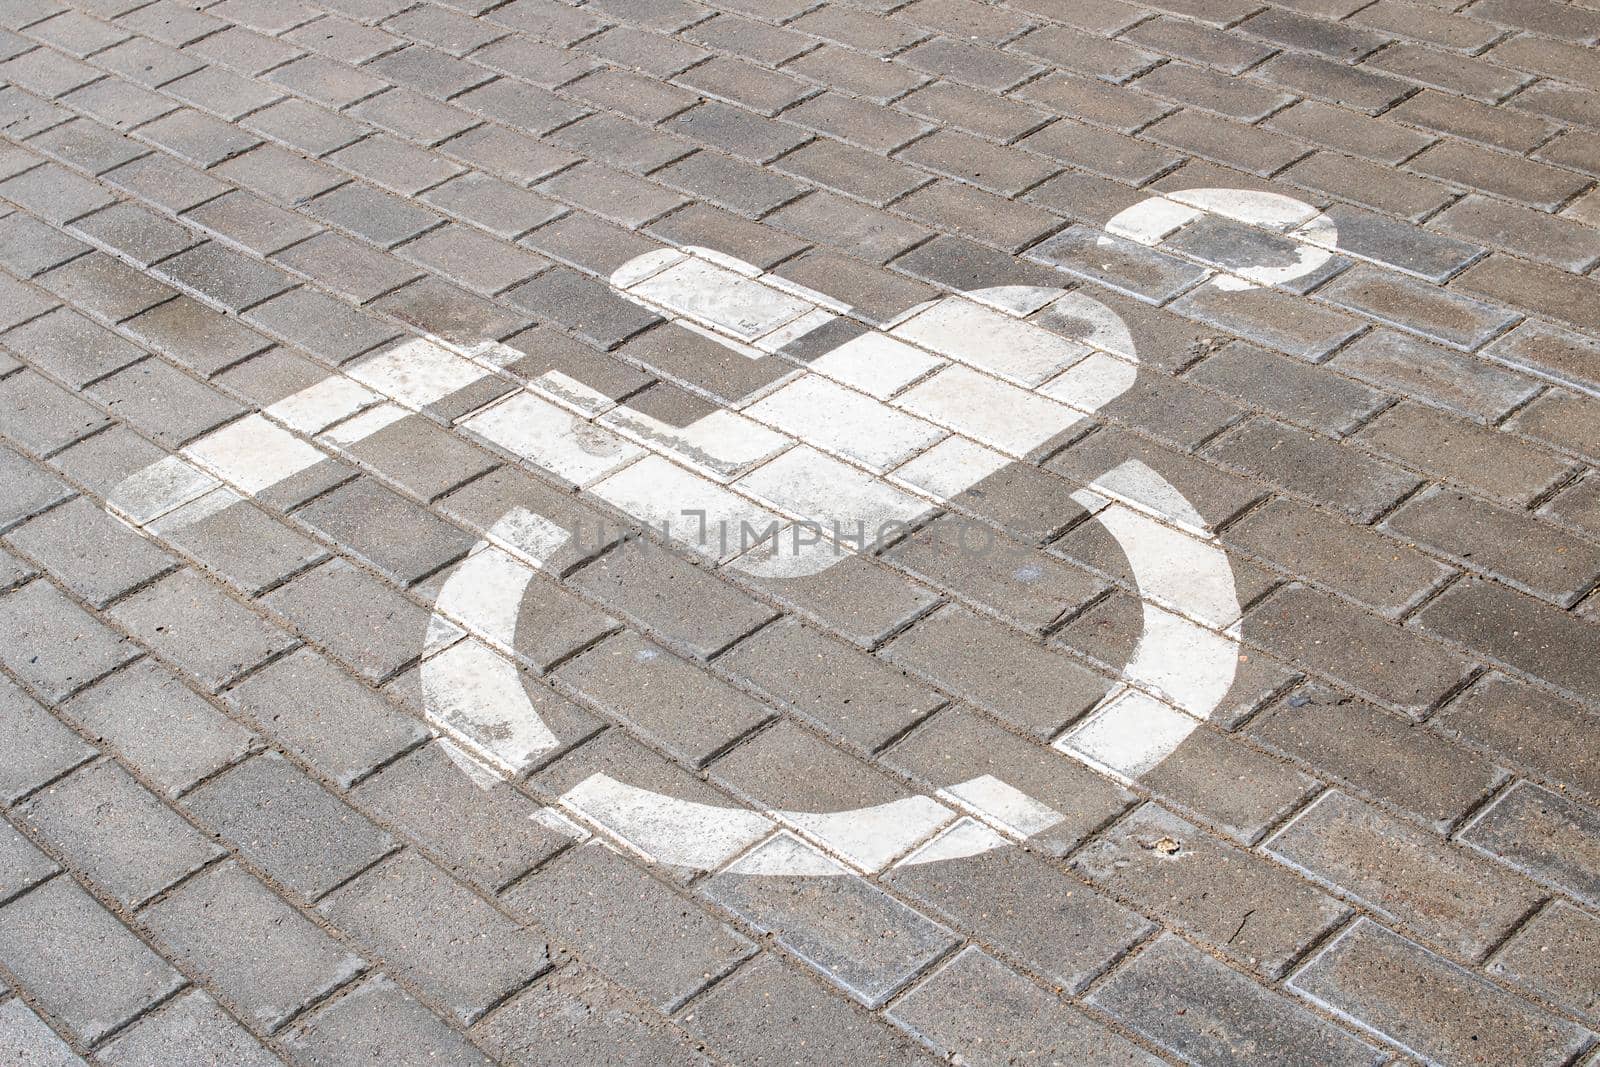 Disabled parking sign in the parking lot close up